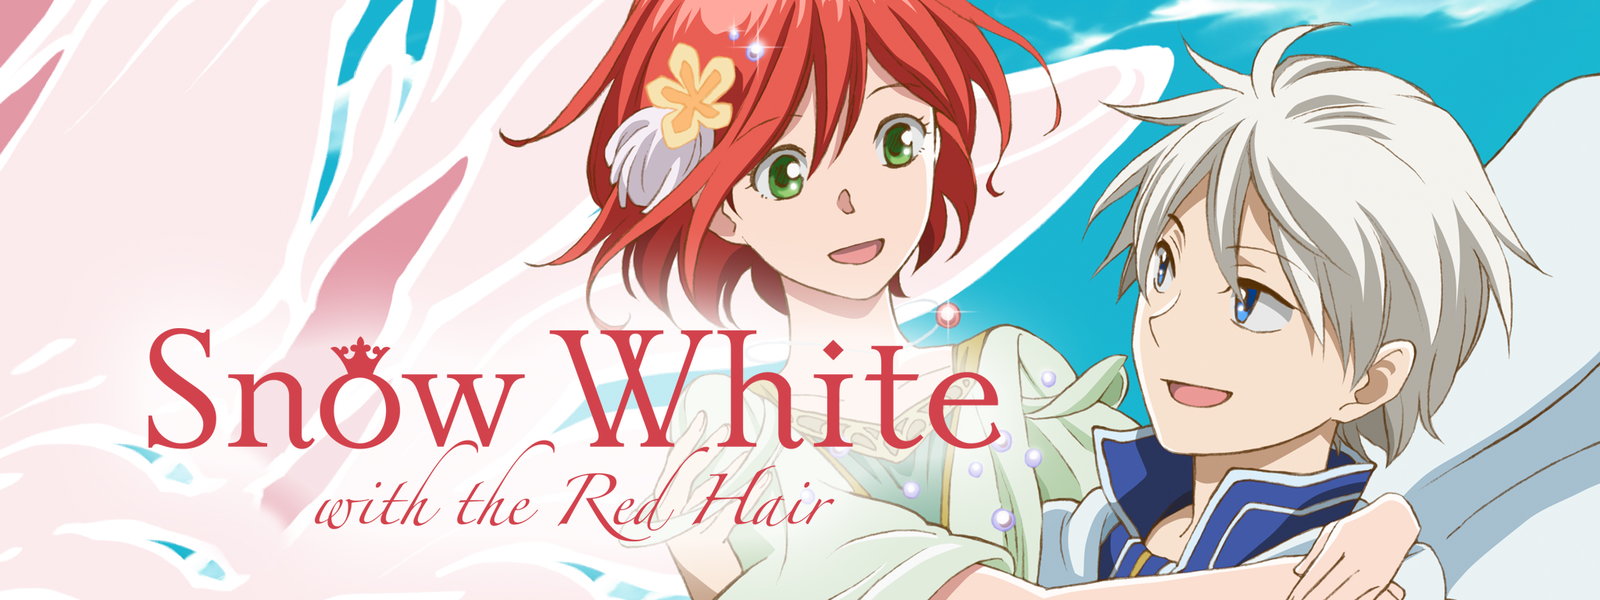 Snow White With The Red Hair Backgrounds, Compatible - PC, Mobile, Gadgets| 1600x600 px